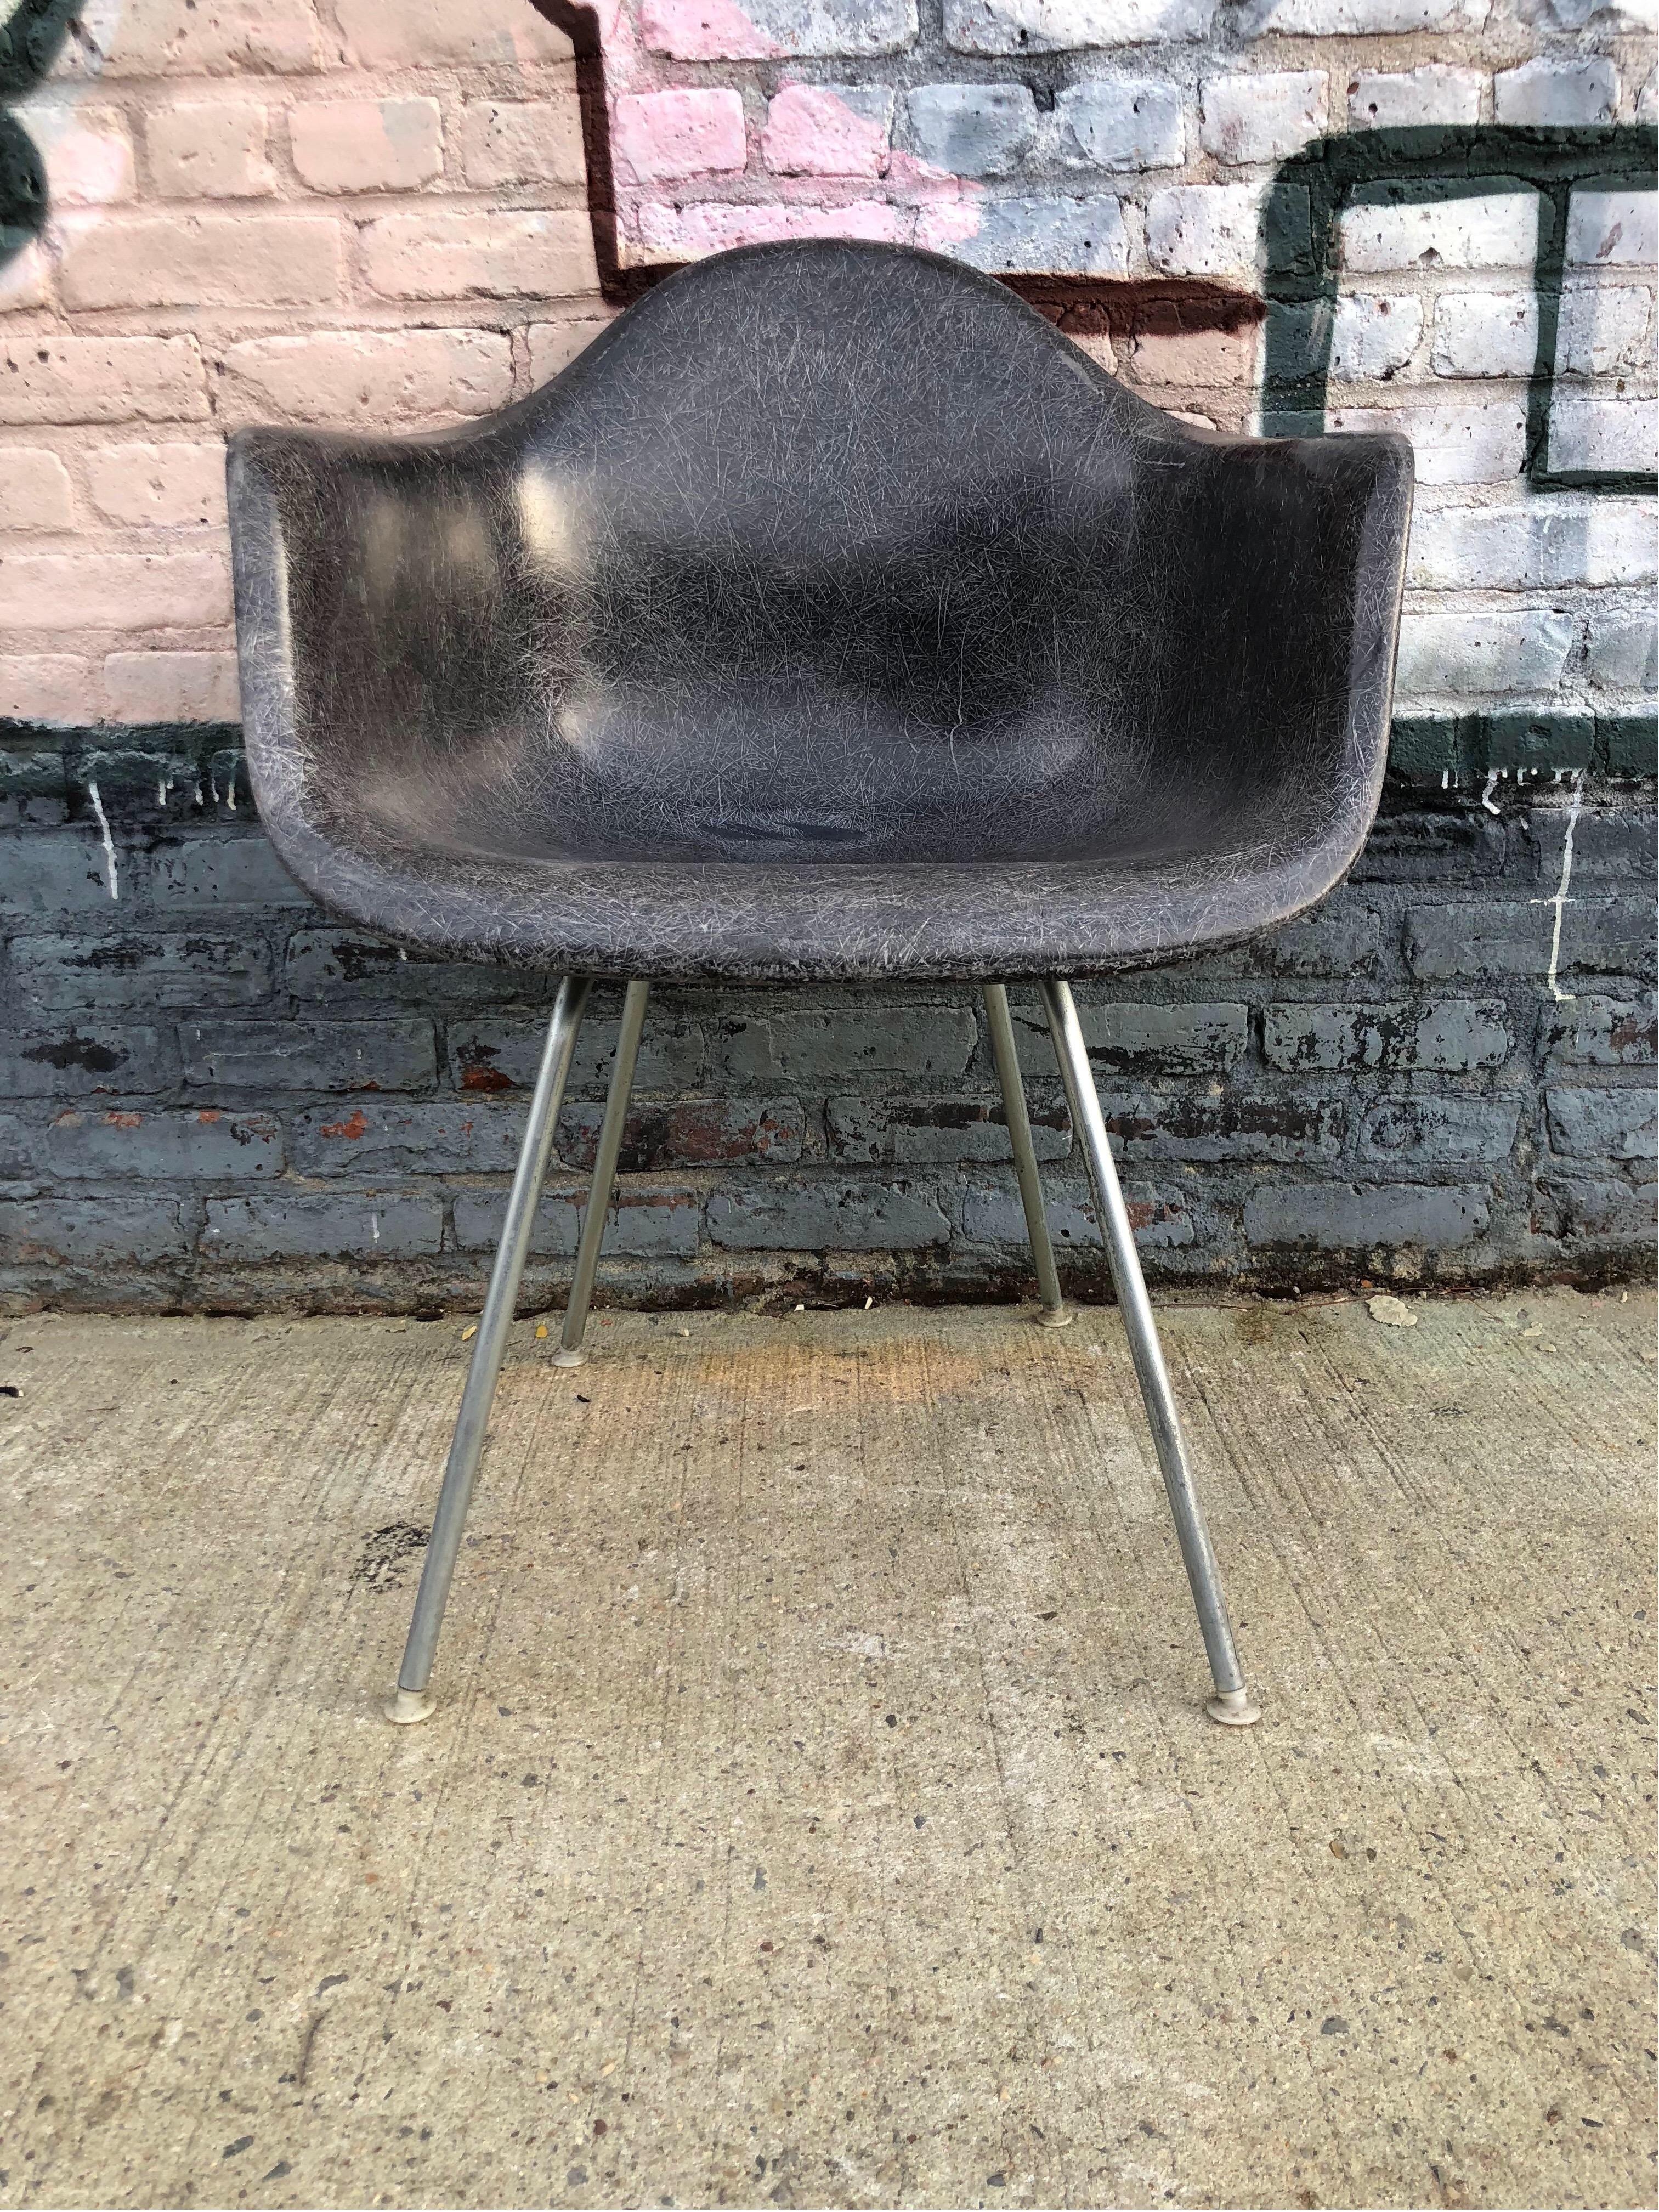 Rare Herman Miller Eames fiberglass armchair. DAX model in rare color black. Authentic Herman Miller base. All mounts and glides intact. Available with different base options. Embossed Herman Miller, circa 1960s.